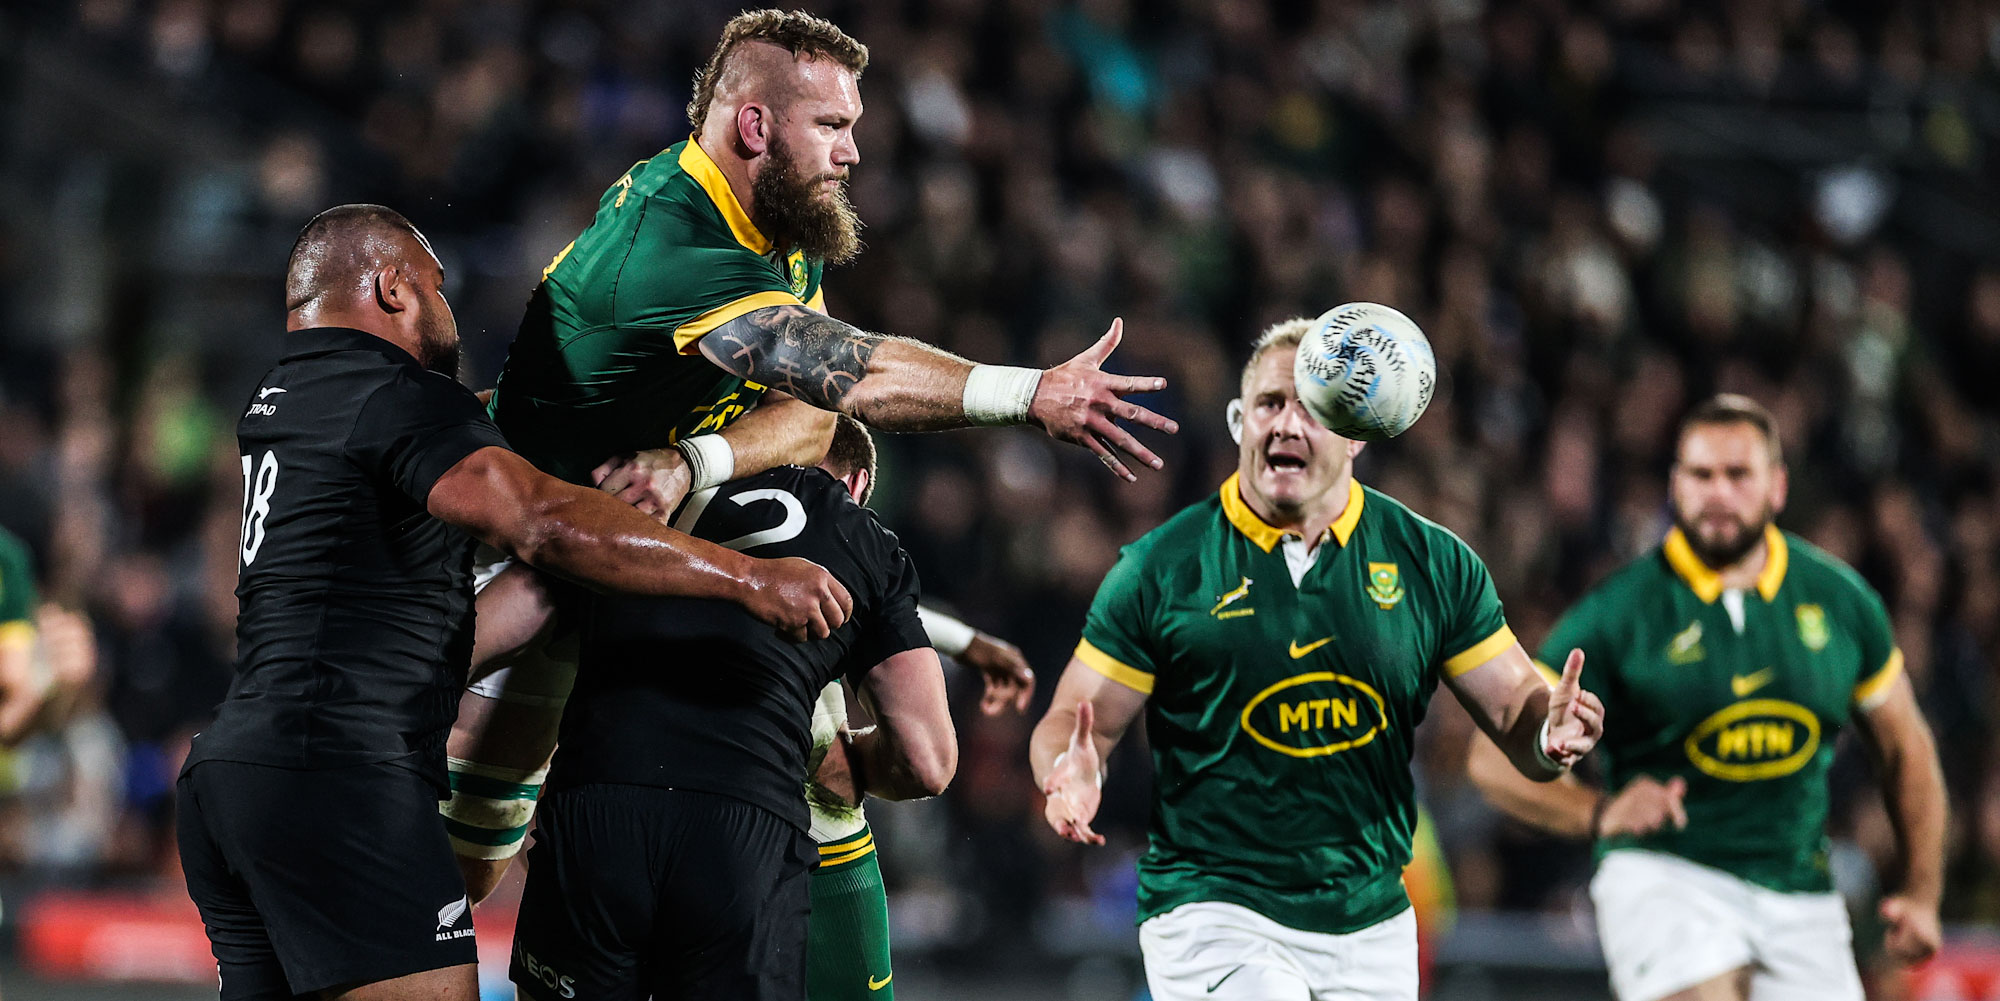 AUCKLAND, NEW ZEALAND - JULY 15: RG Snyman of South Africa looks to pass during The Rugby Championship match between the New Zealand All Blacks and South Africa Springboks at Mt Smart Stadium on July 15, 2023 in Auckland, New Zealand. (Photo by Fiona Goodall/Getty Images)